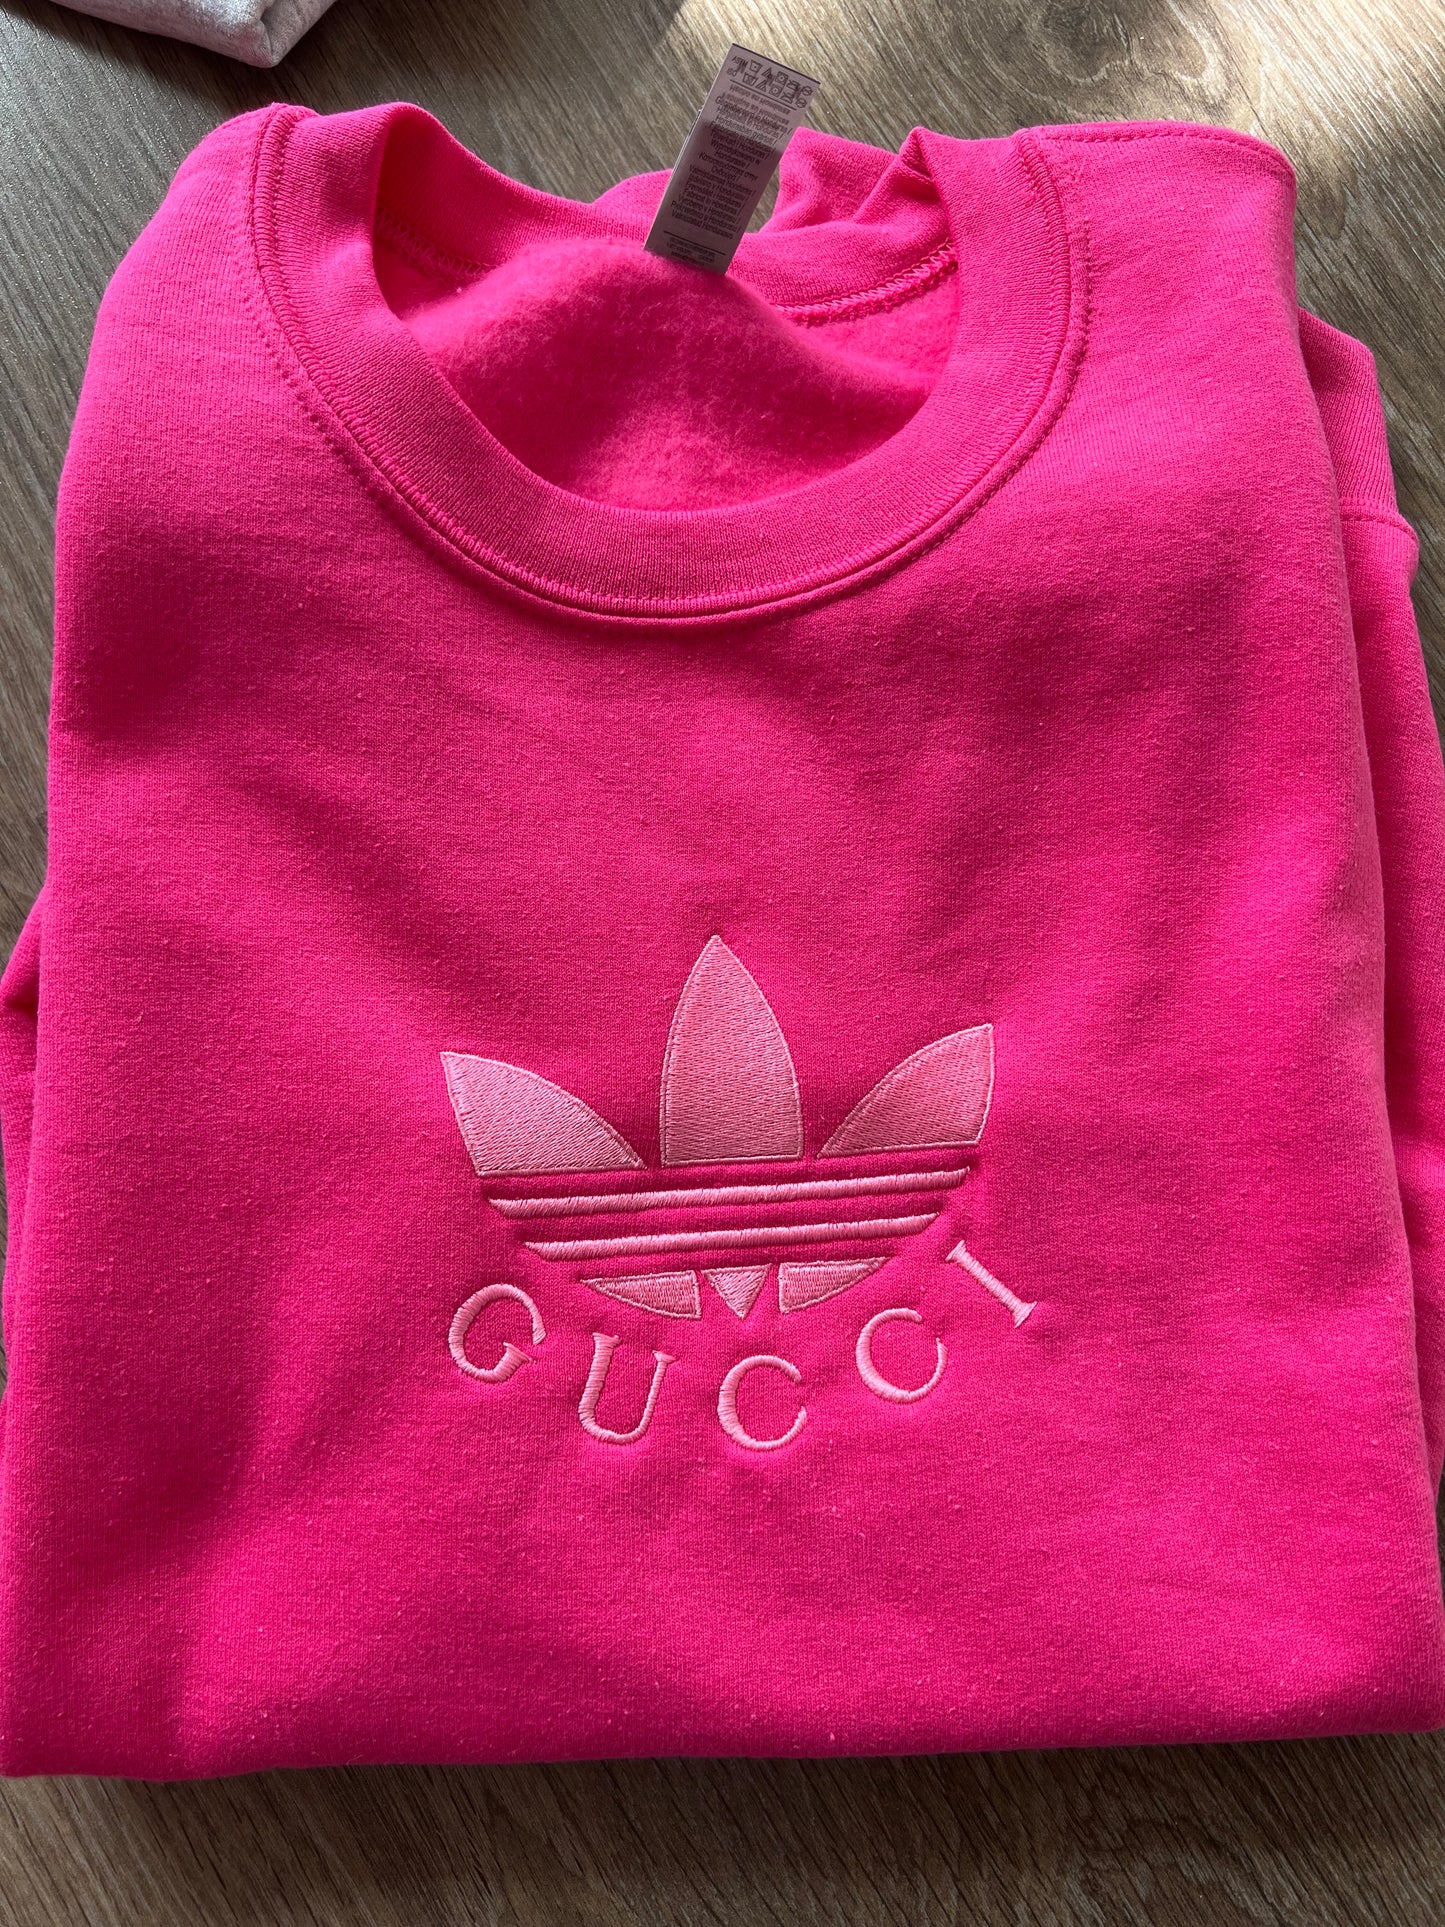 Hot pink with pink GeGe Crew Embroidered